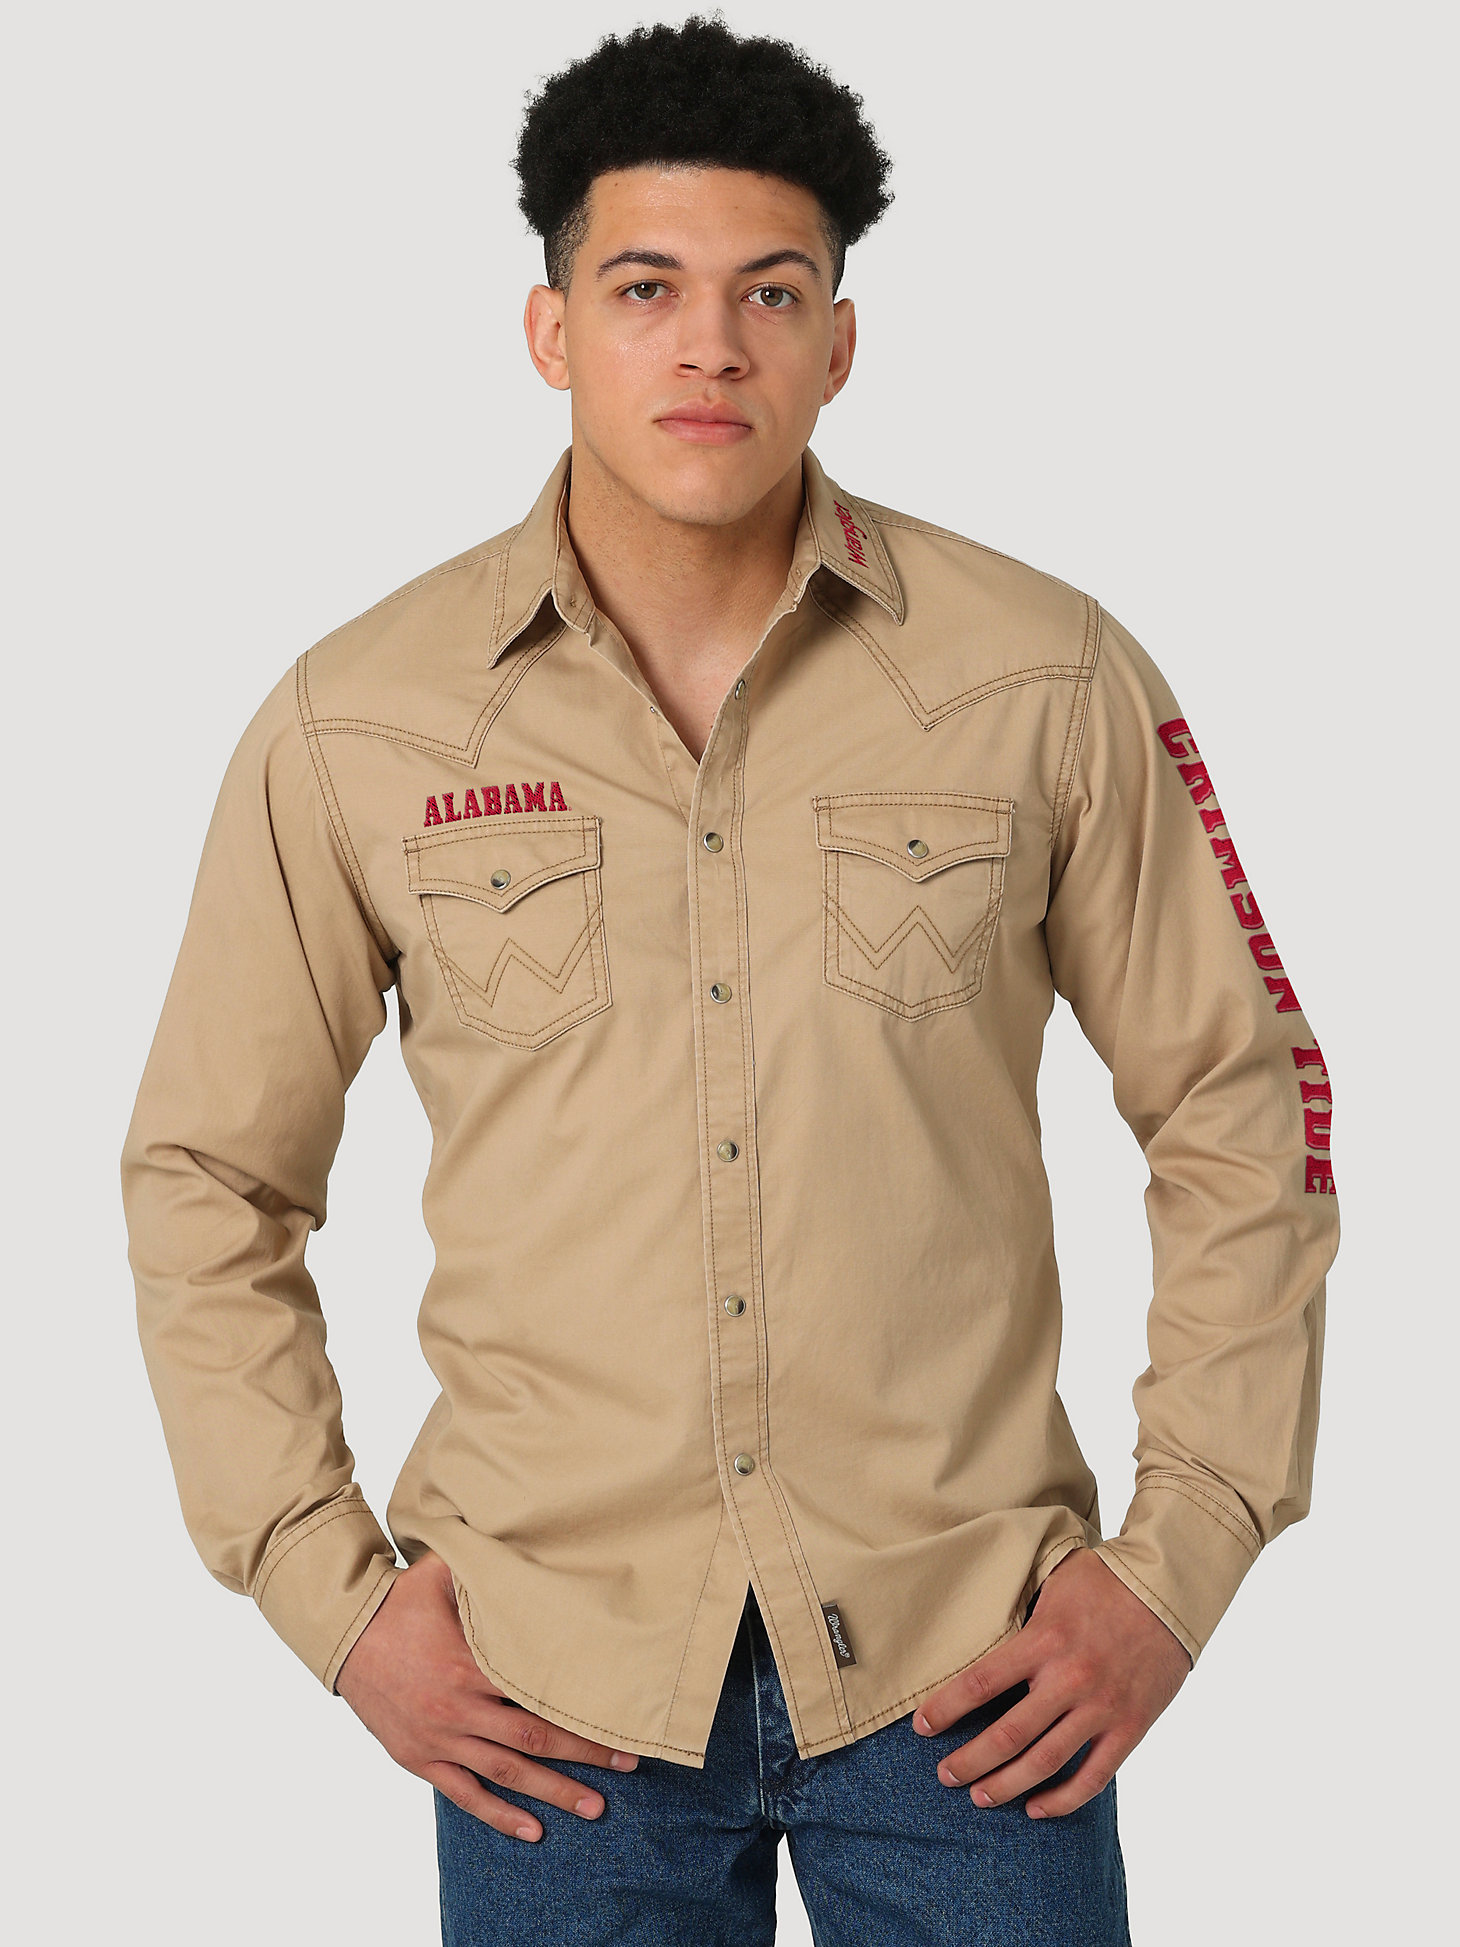 Wrangler Collegiate Embroidered Twill Western Snap Shirt in University of Alabama main view